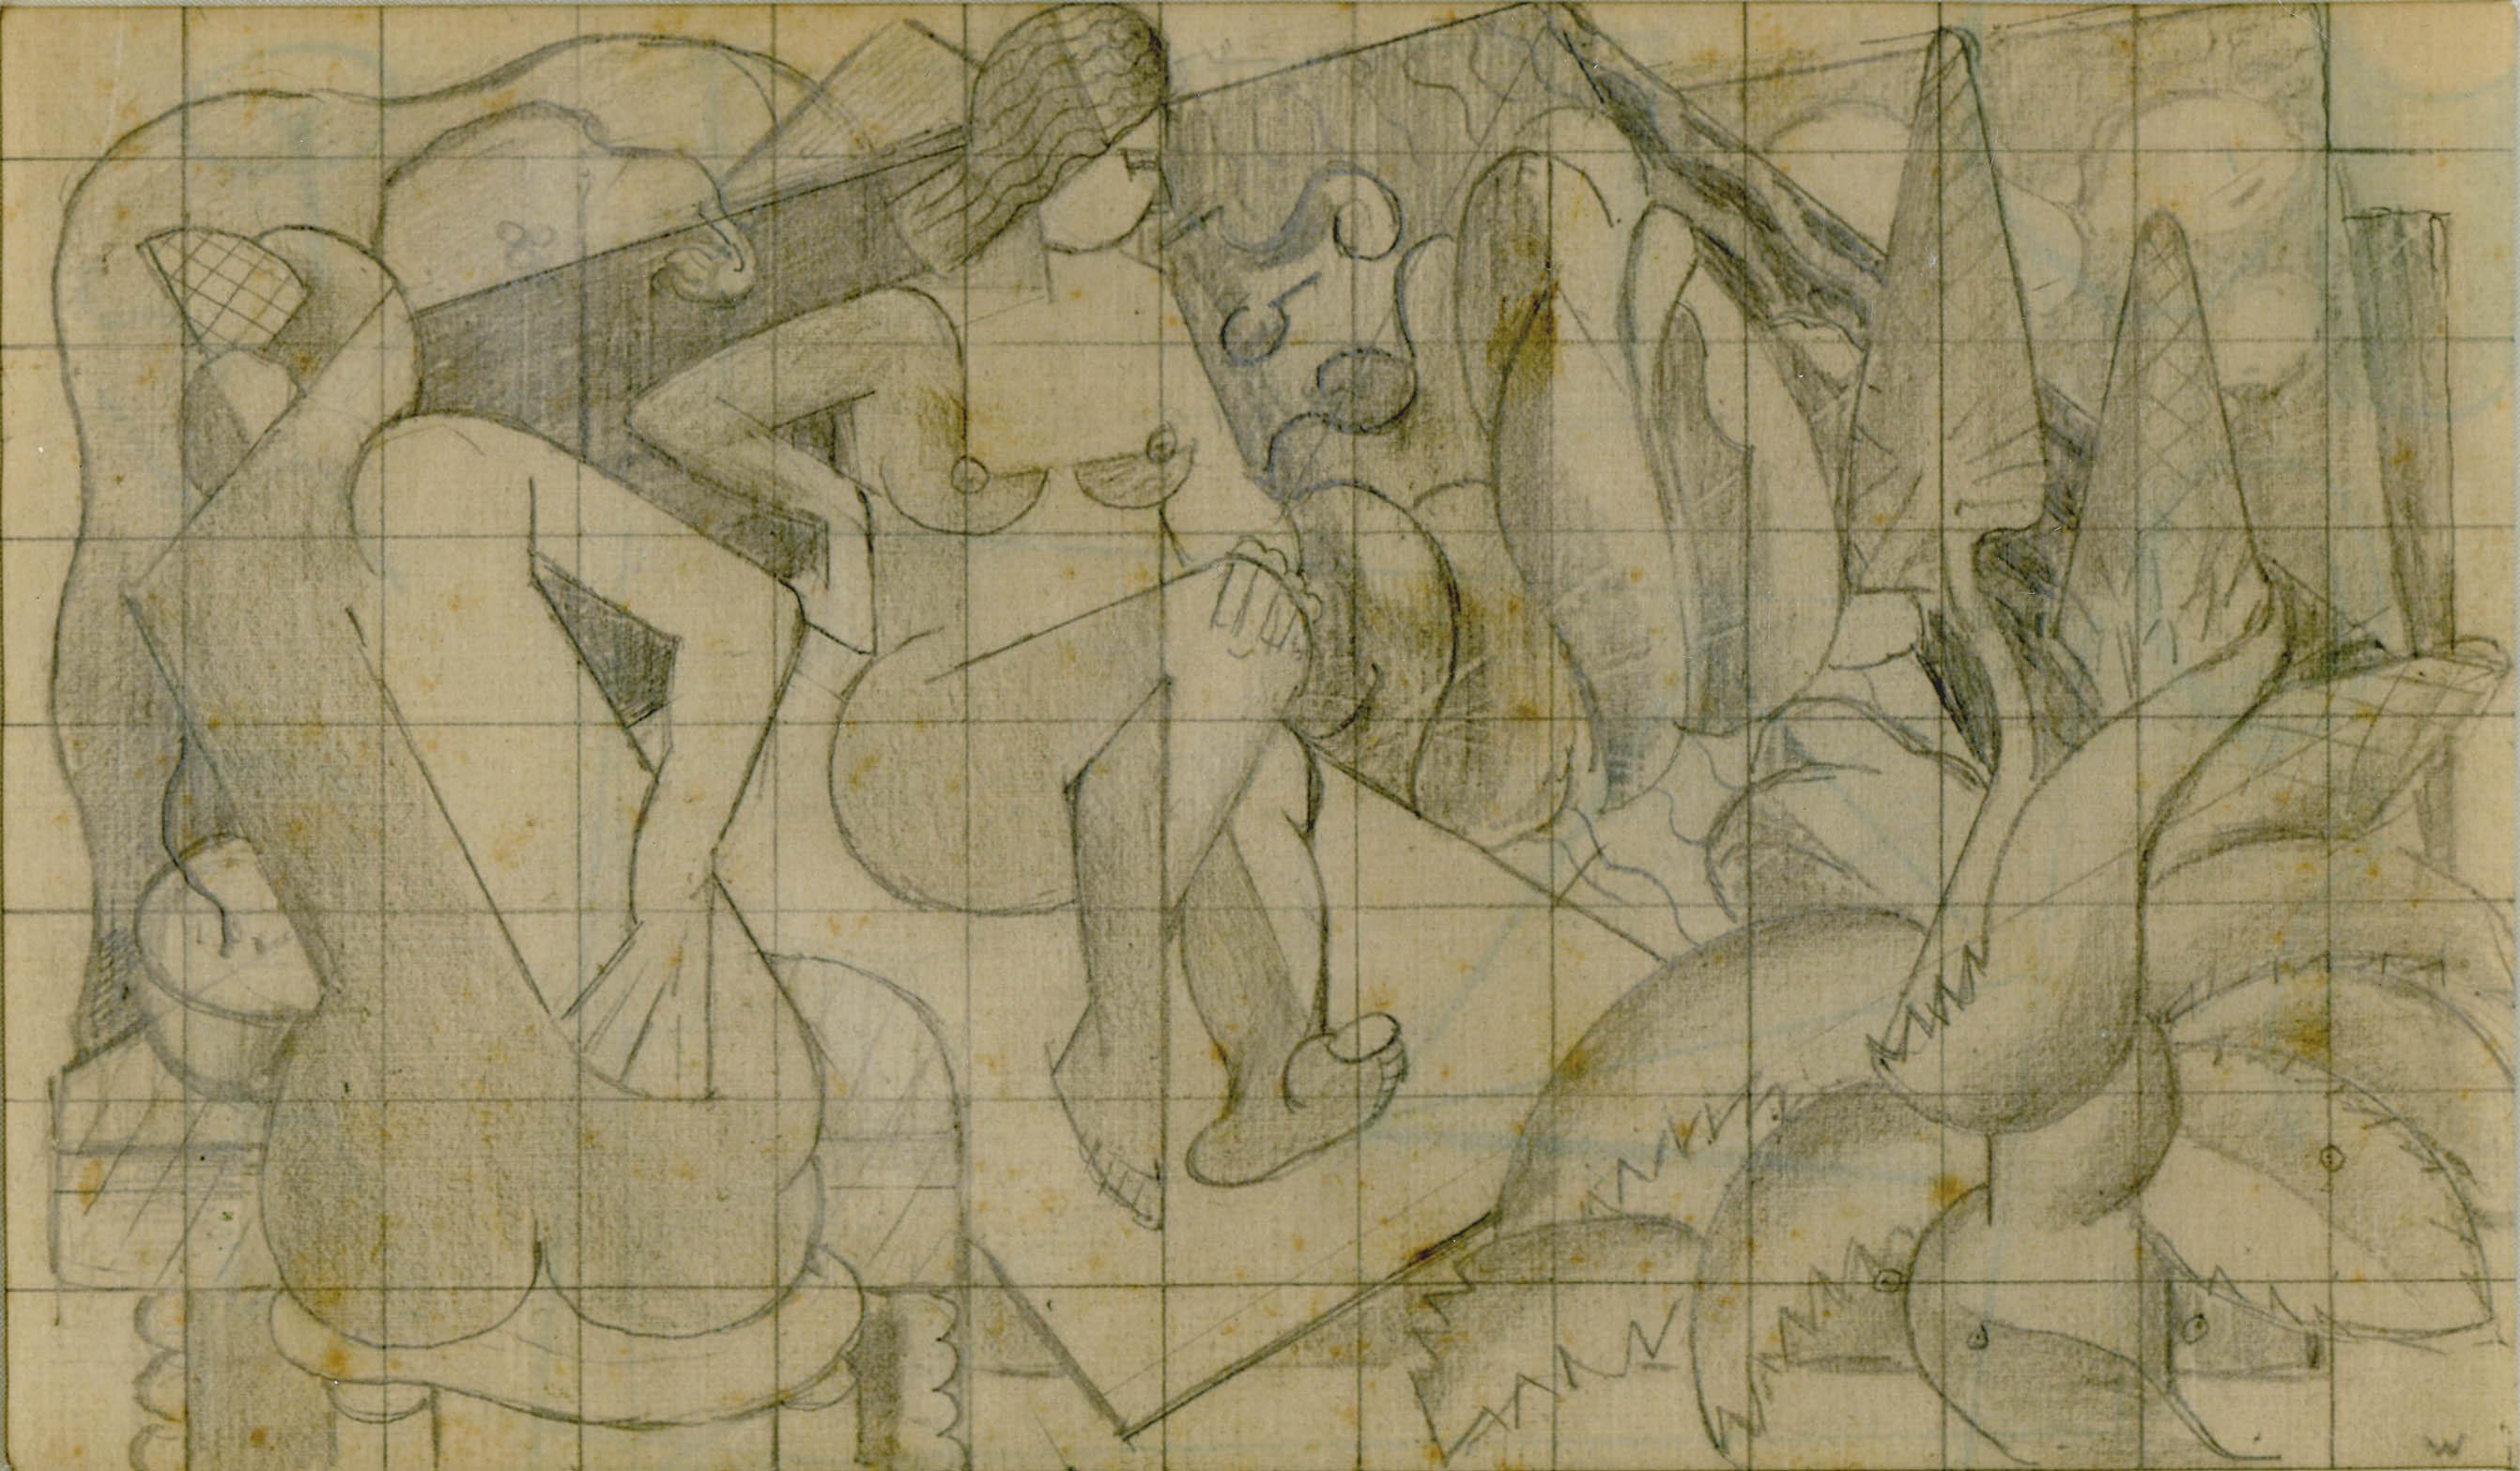 Preparatory drawing for Figure Composition, Carmel (CA.)